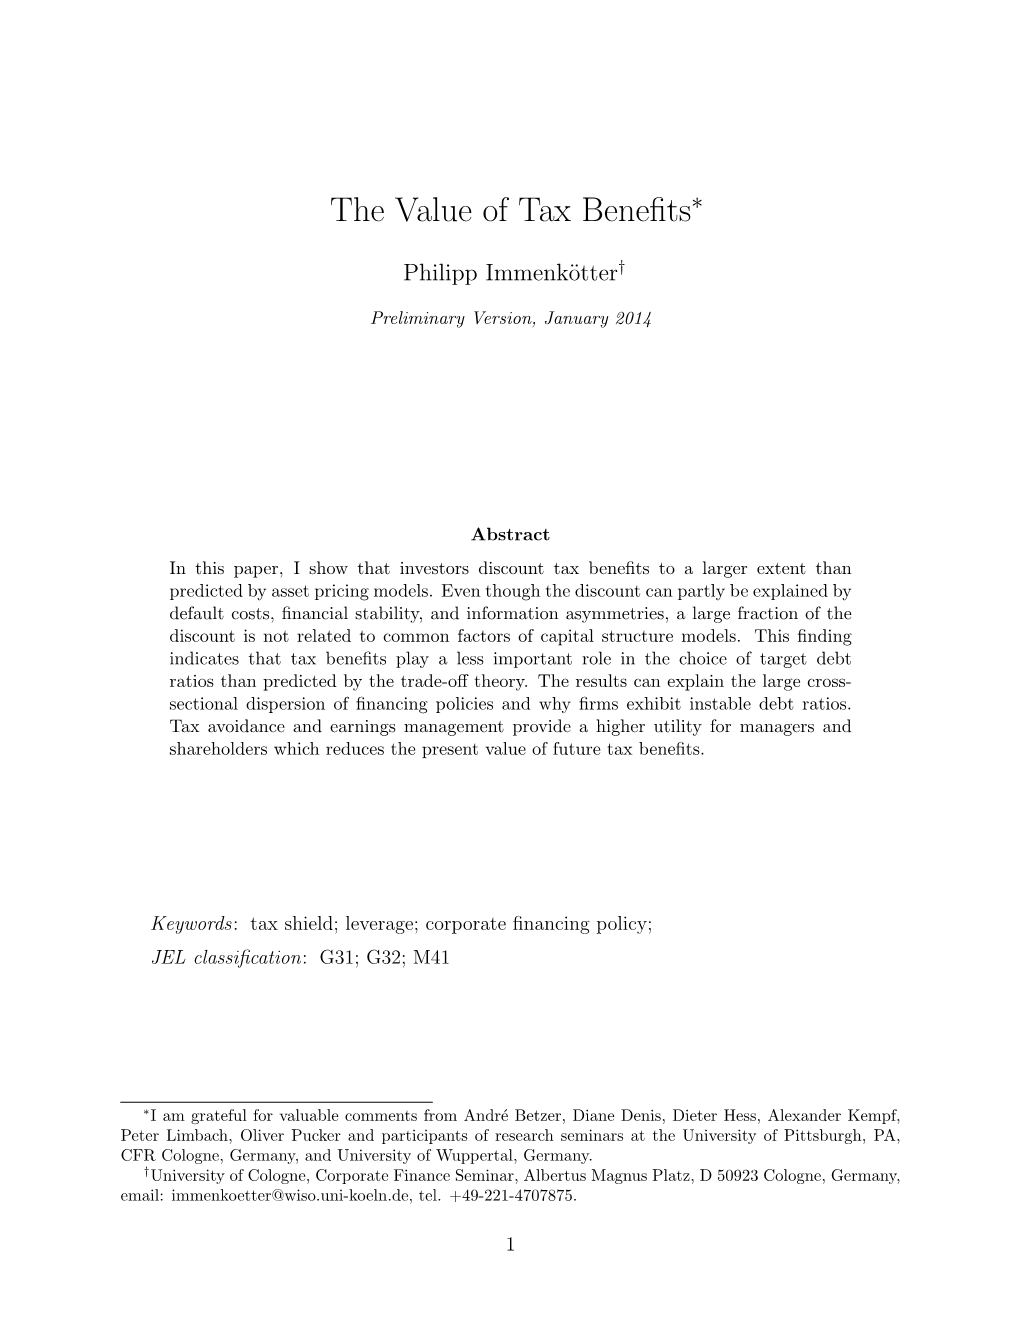 The Value of Tax Benefits